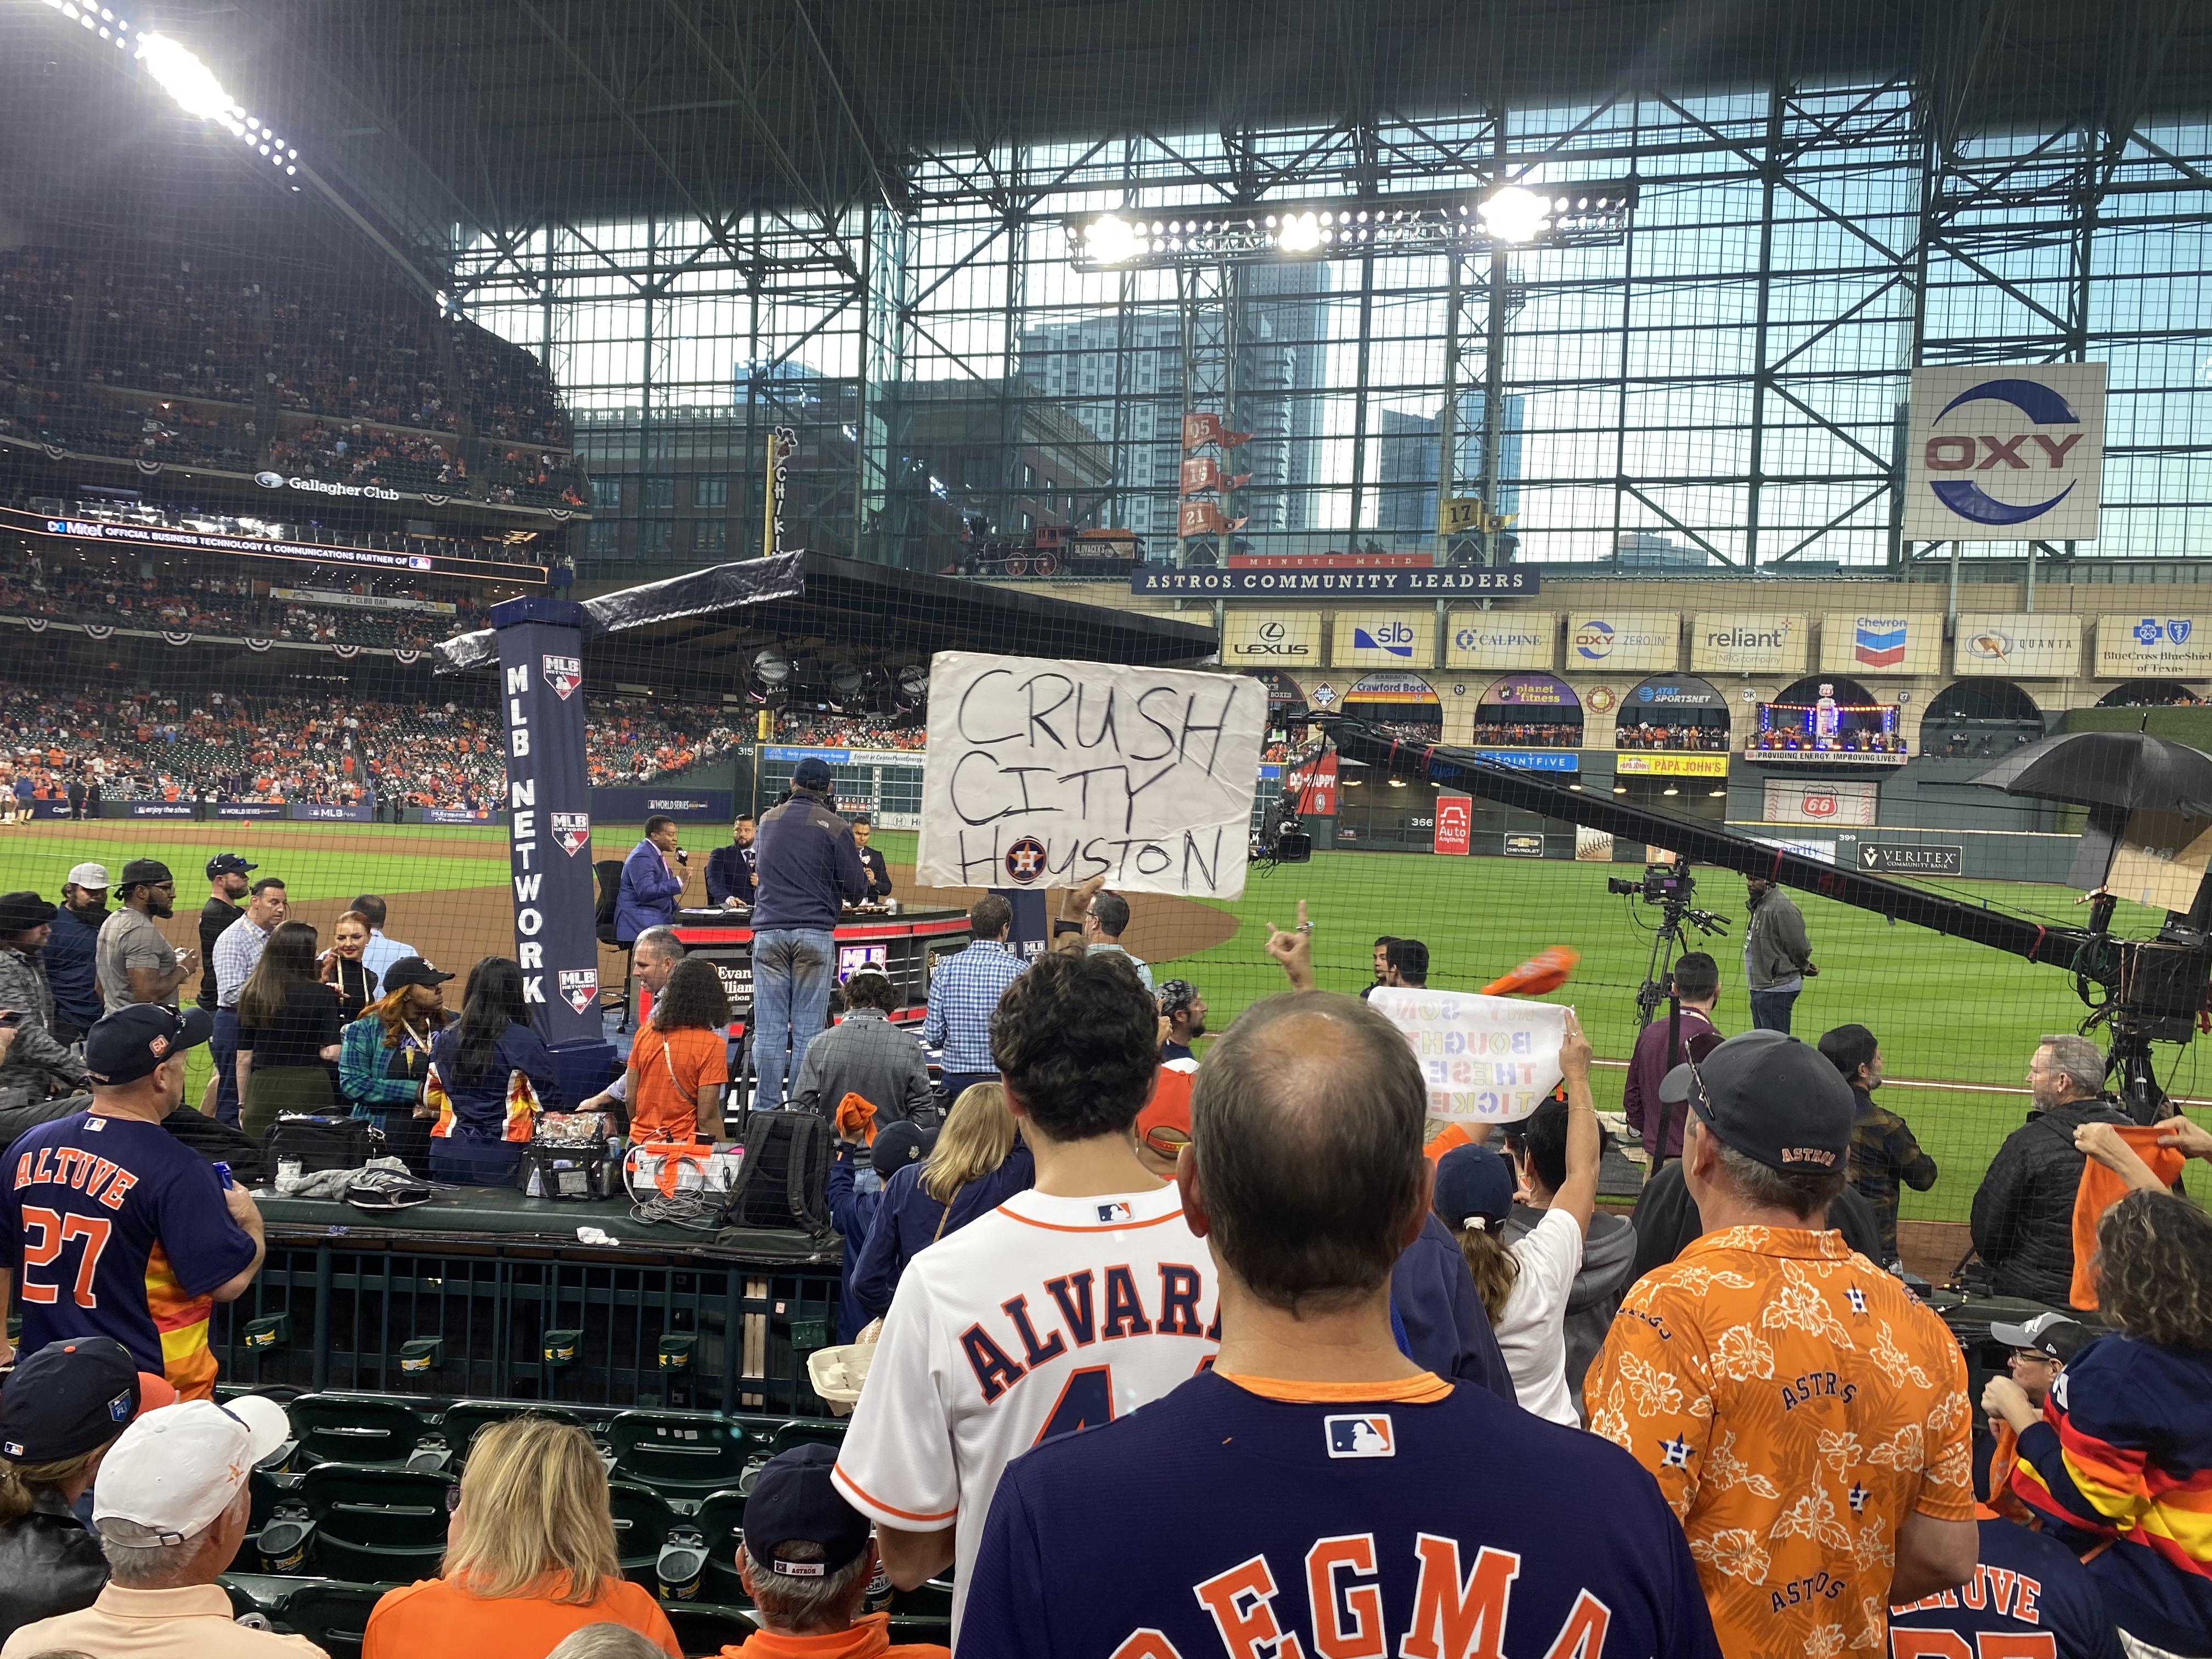 Houston Astros on X: Tonight we light up Minute Maid Park in honor of  lives lost to COVID-19. Our condolences go out to our fans & their  loved ones. As we look